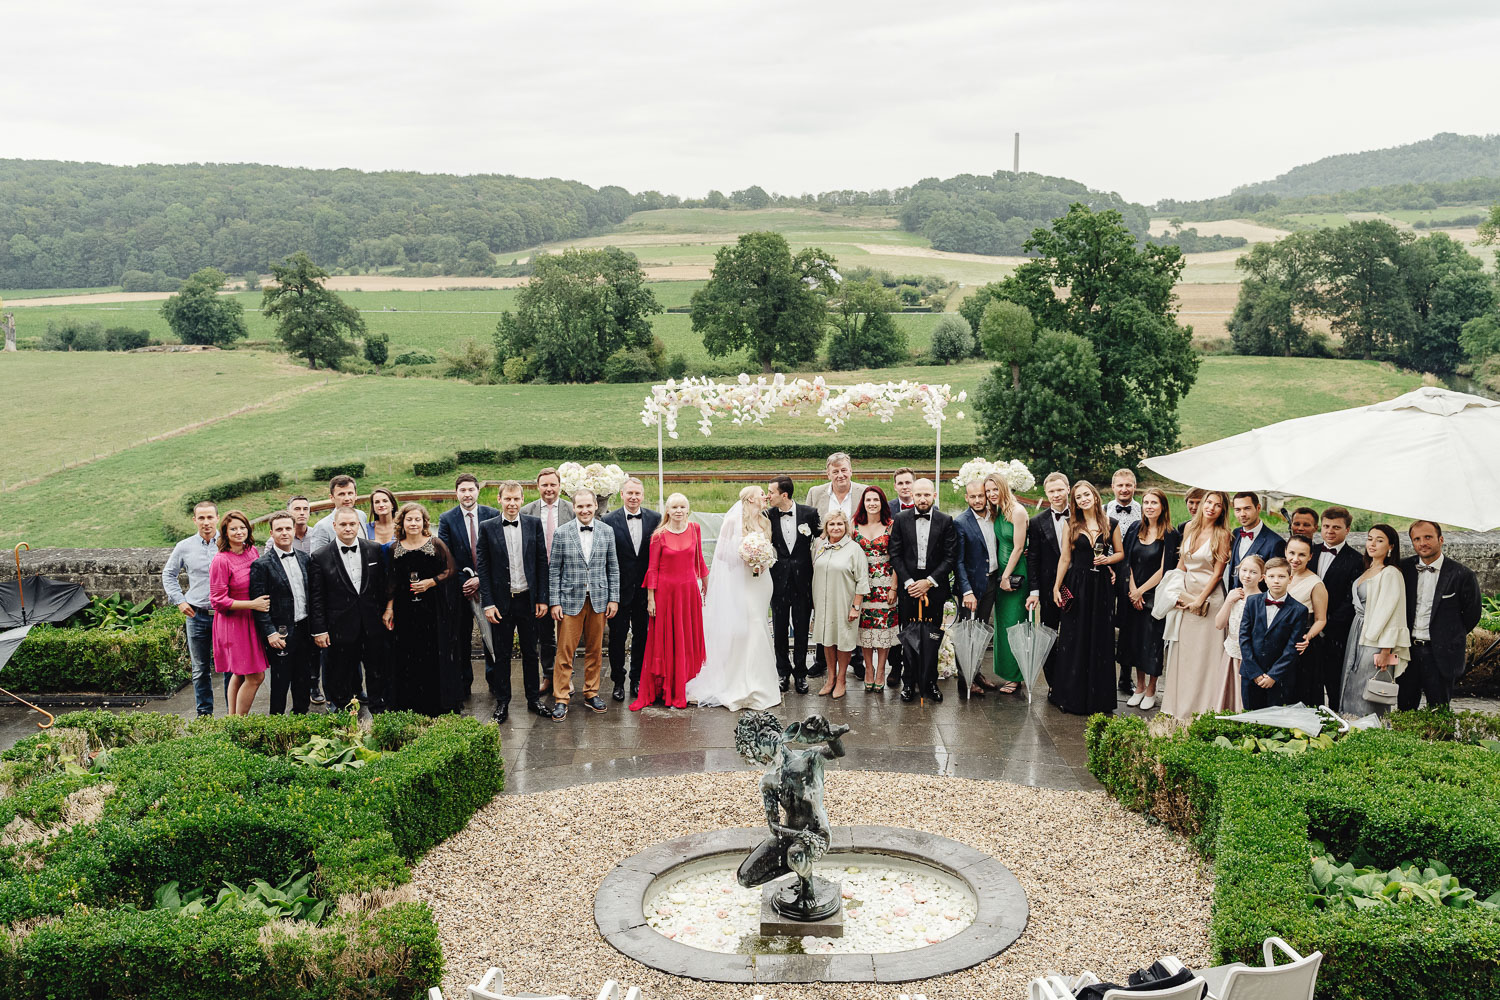 Guests posing after wedding ceremony in a terrace of Chateau Neercanne